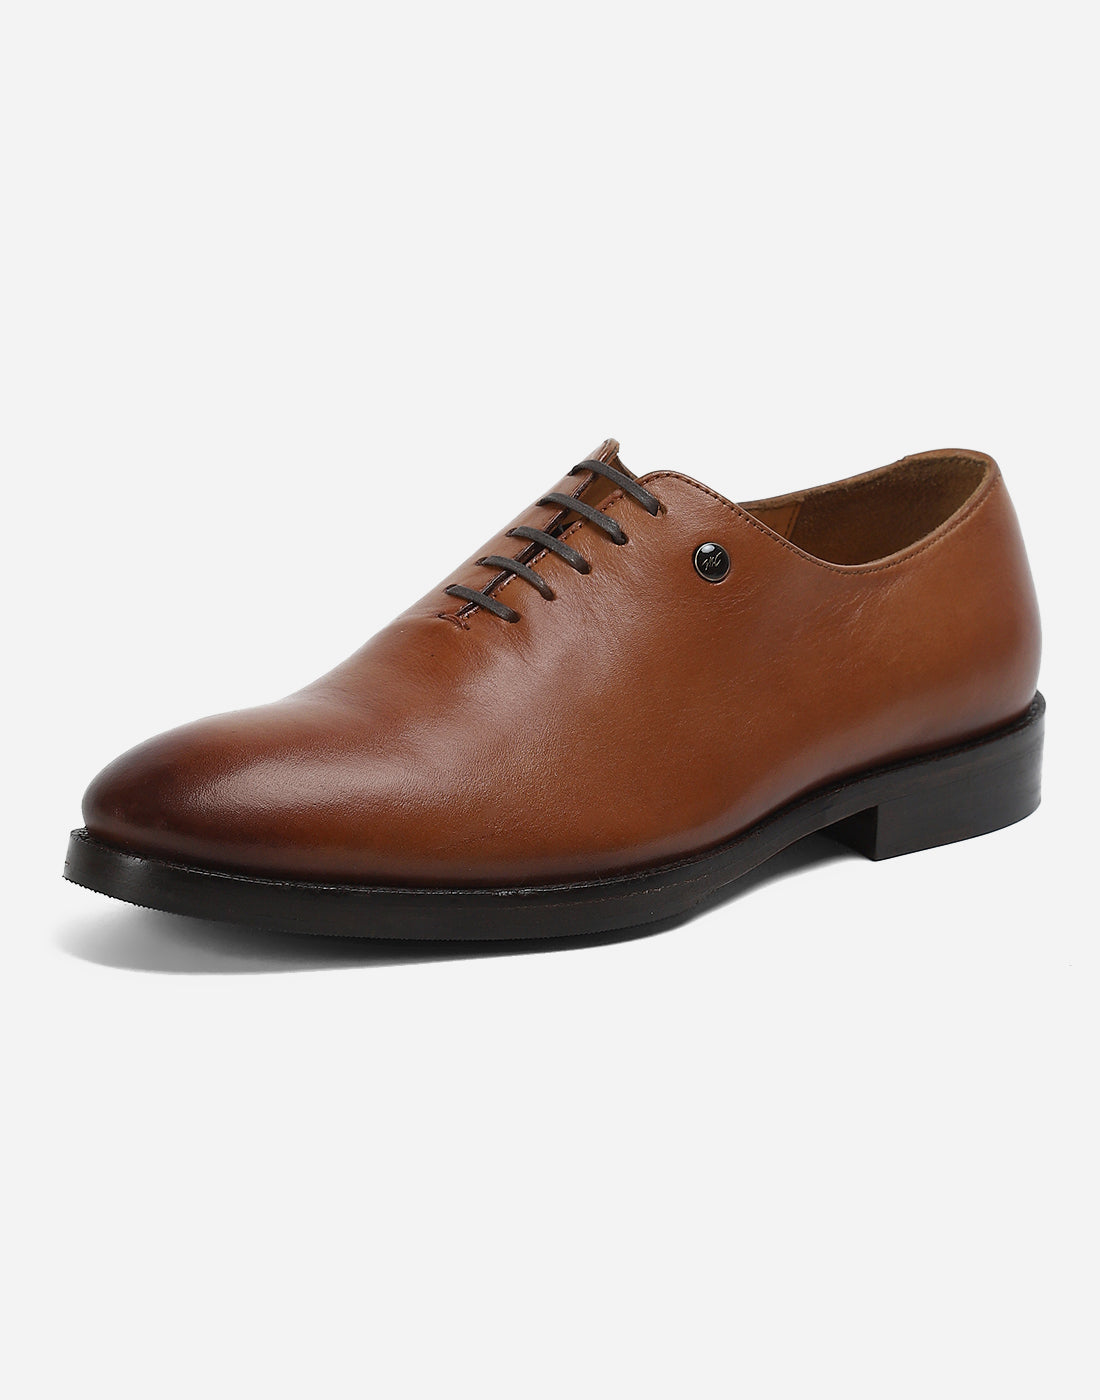 Men Tan Lace Up Genuine Leather Formal Oxfords